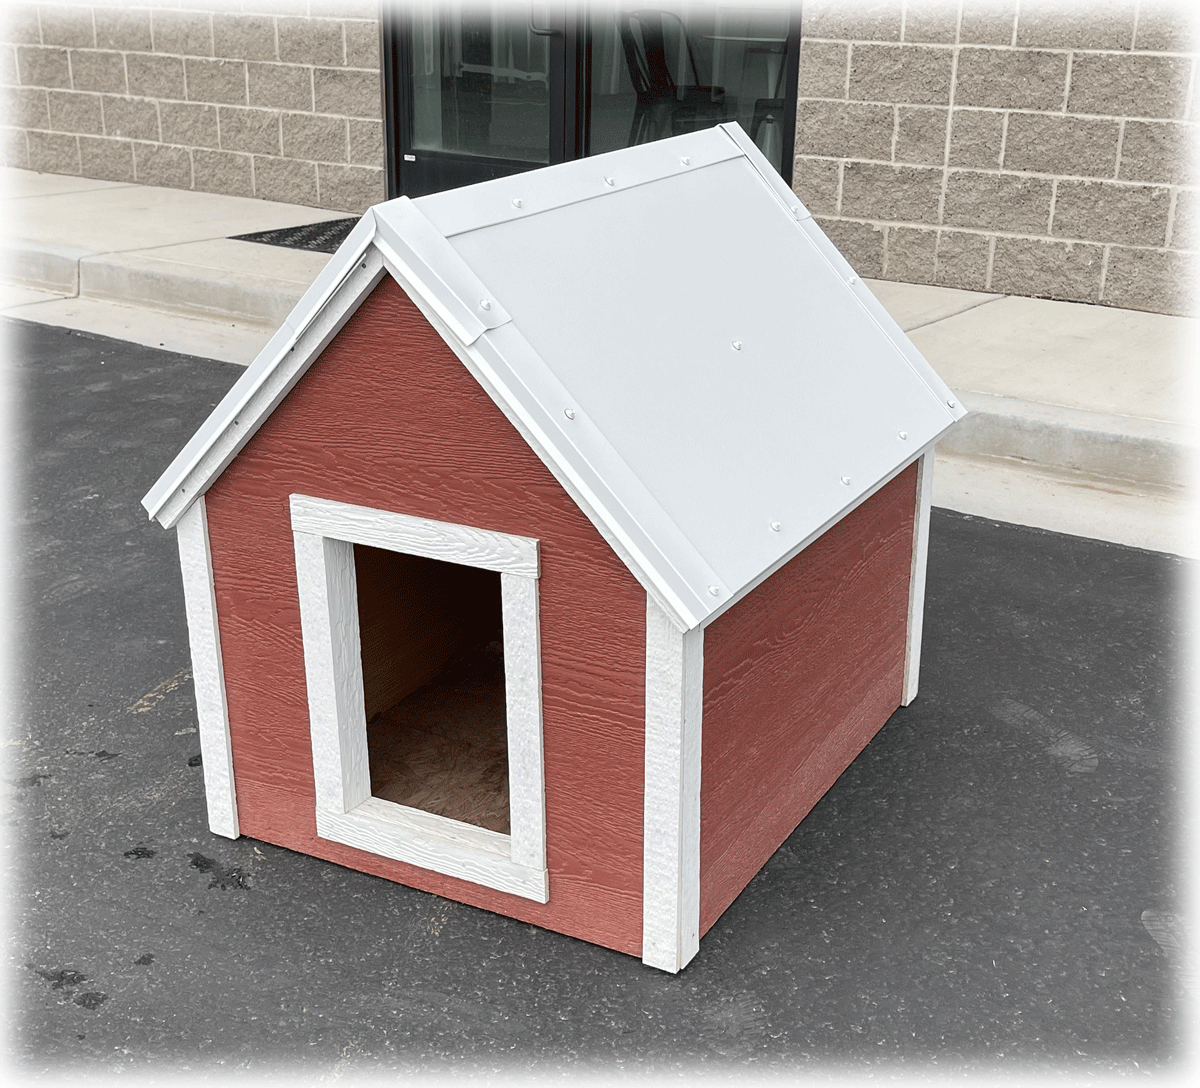 A Large red and white doghouse